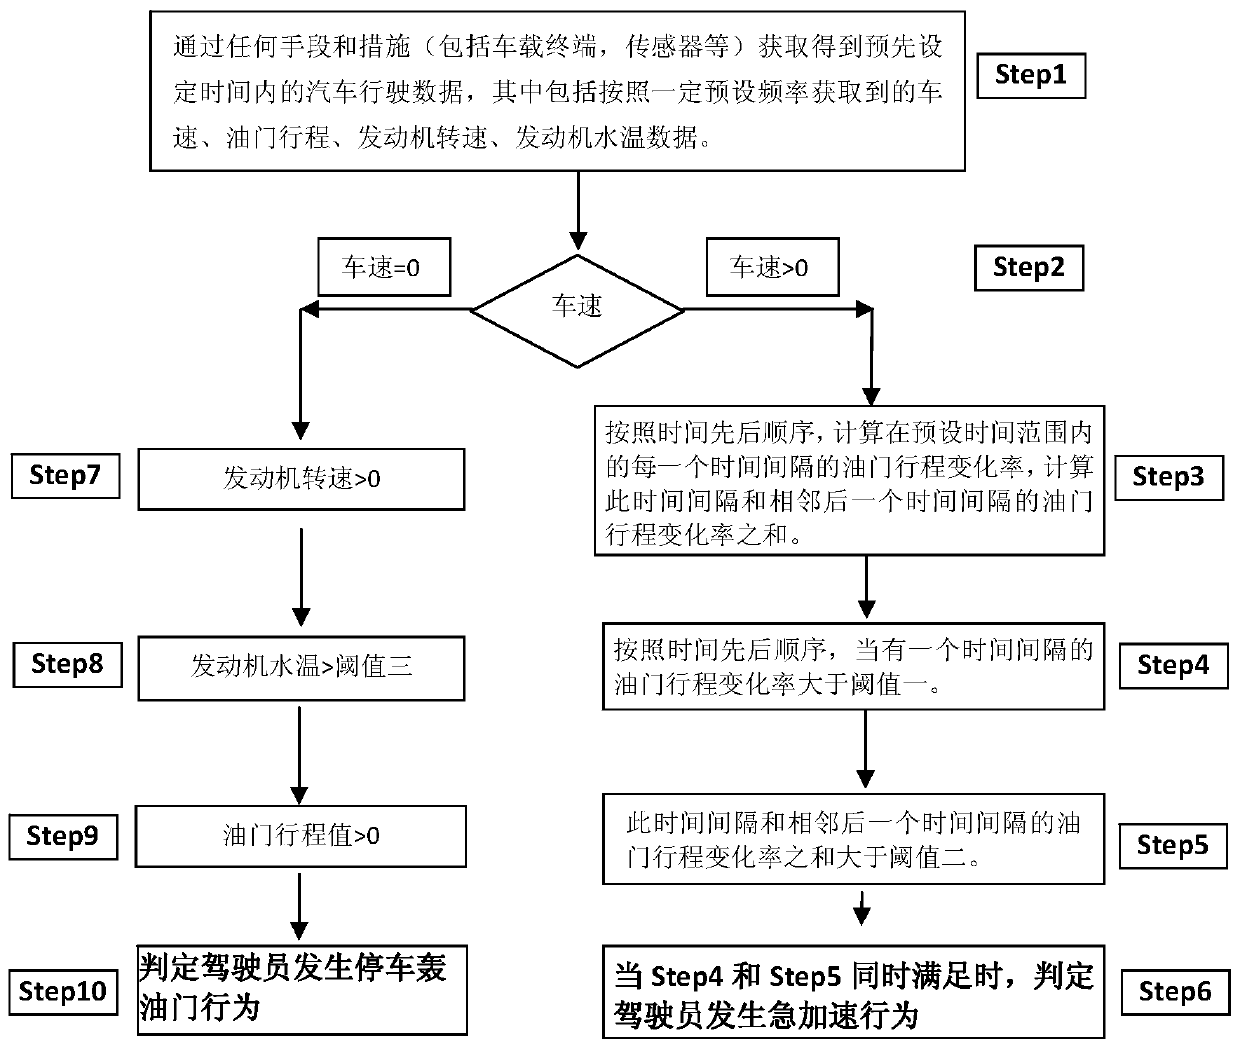 Recognition Method of Bad Driving Behaviors of Automobile Drivers Stepping on the Accelerator